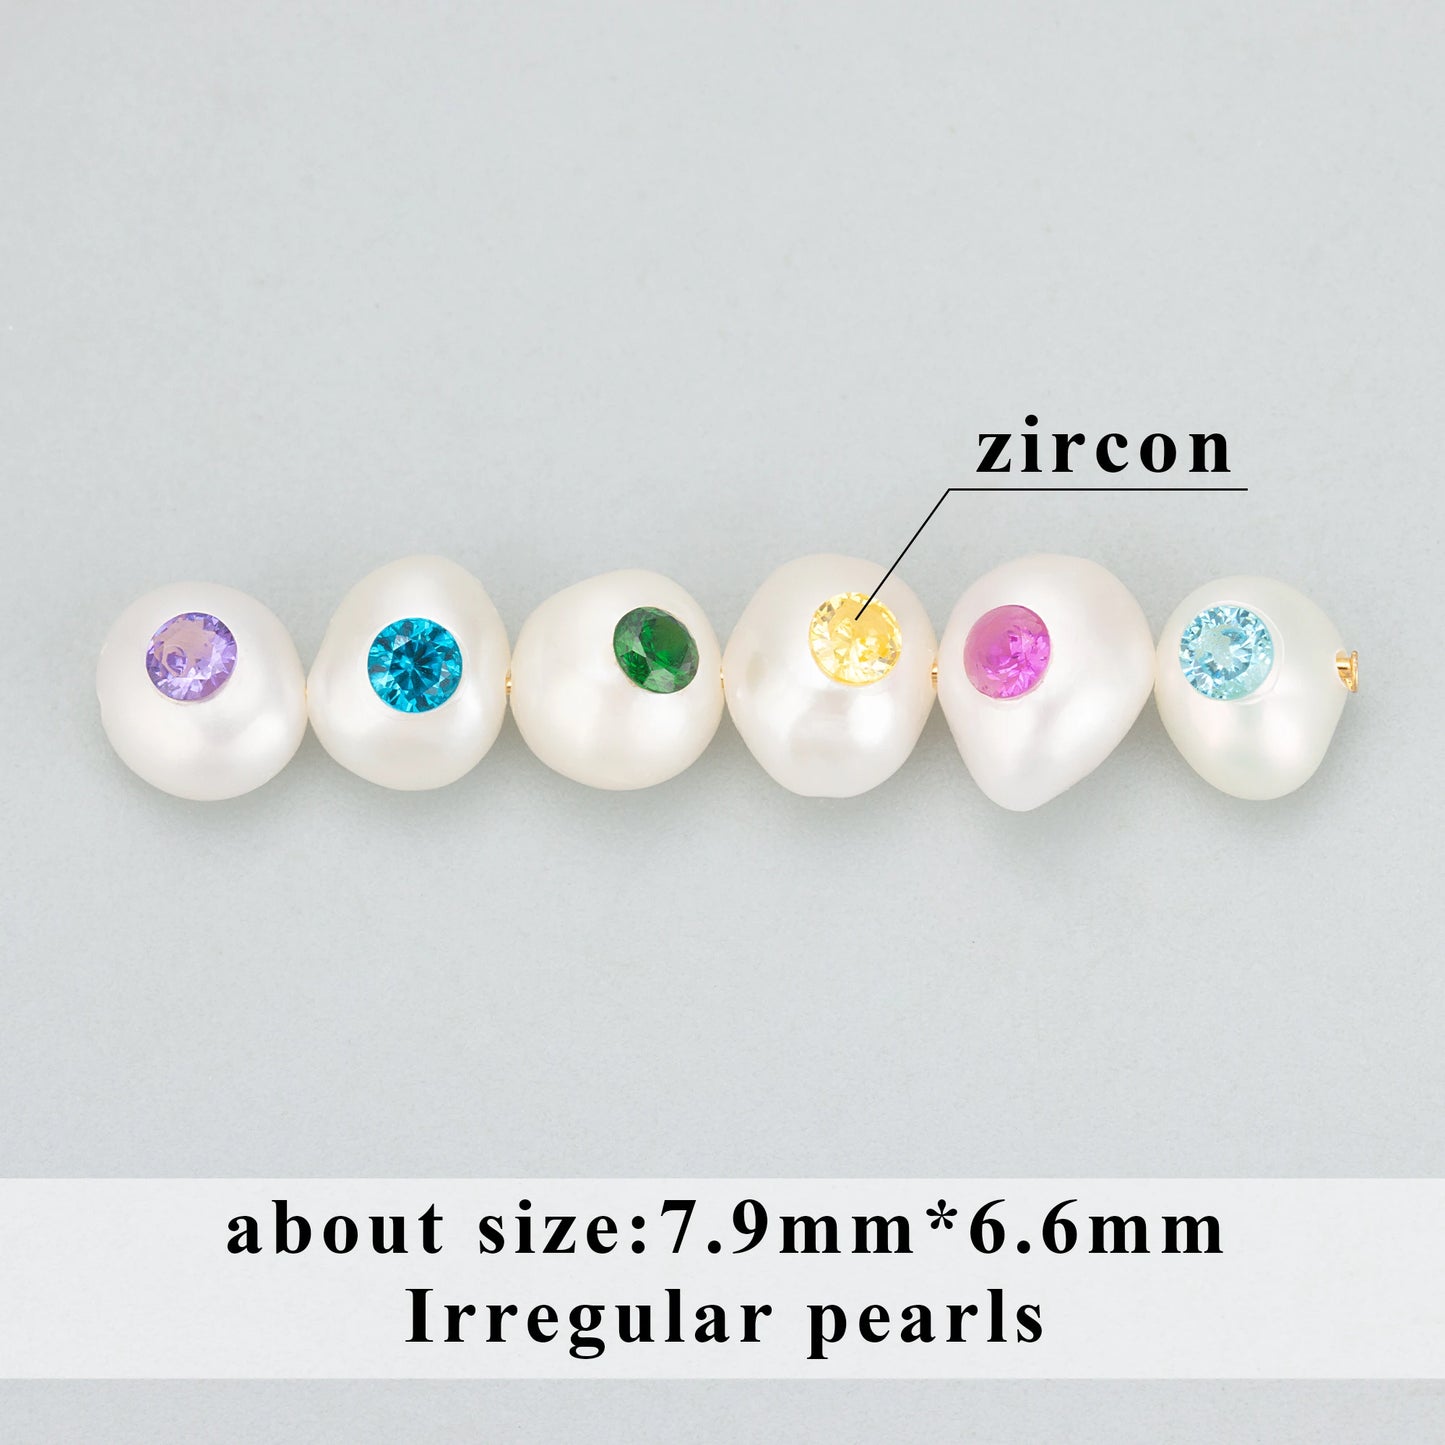 GUFEATHER MD98,natural pearl,jewelry accessories,pearl with zircons,hand made,charms,jewelry making,diy pendants,6pcs/lot